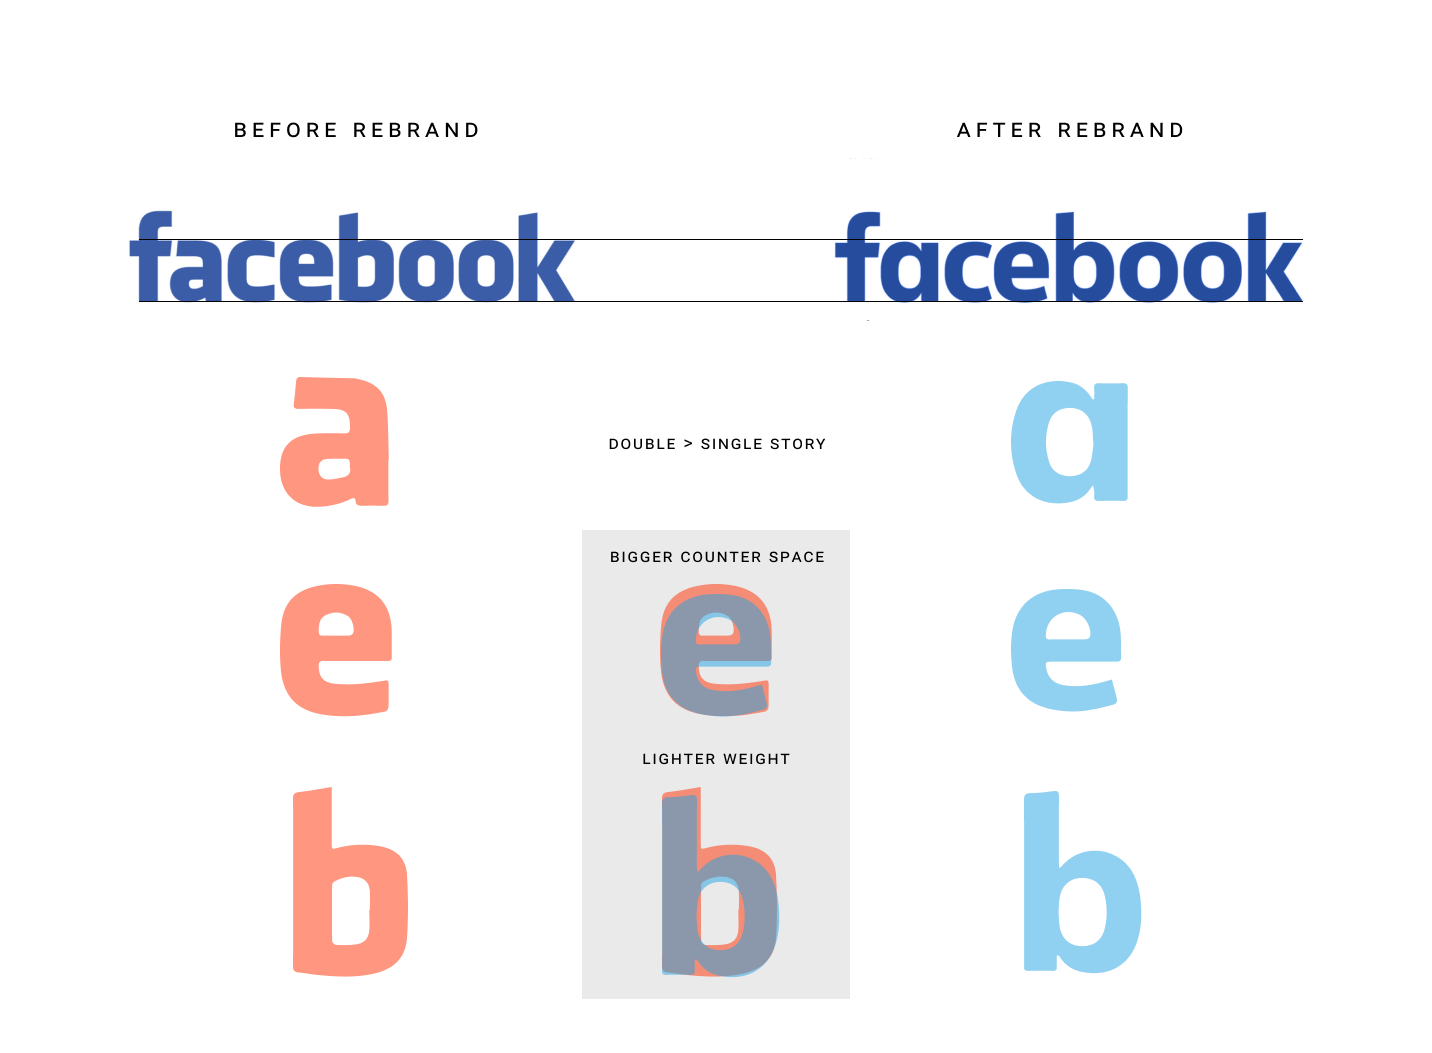 logotype difference after the 2015 rebrand